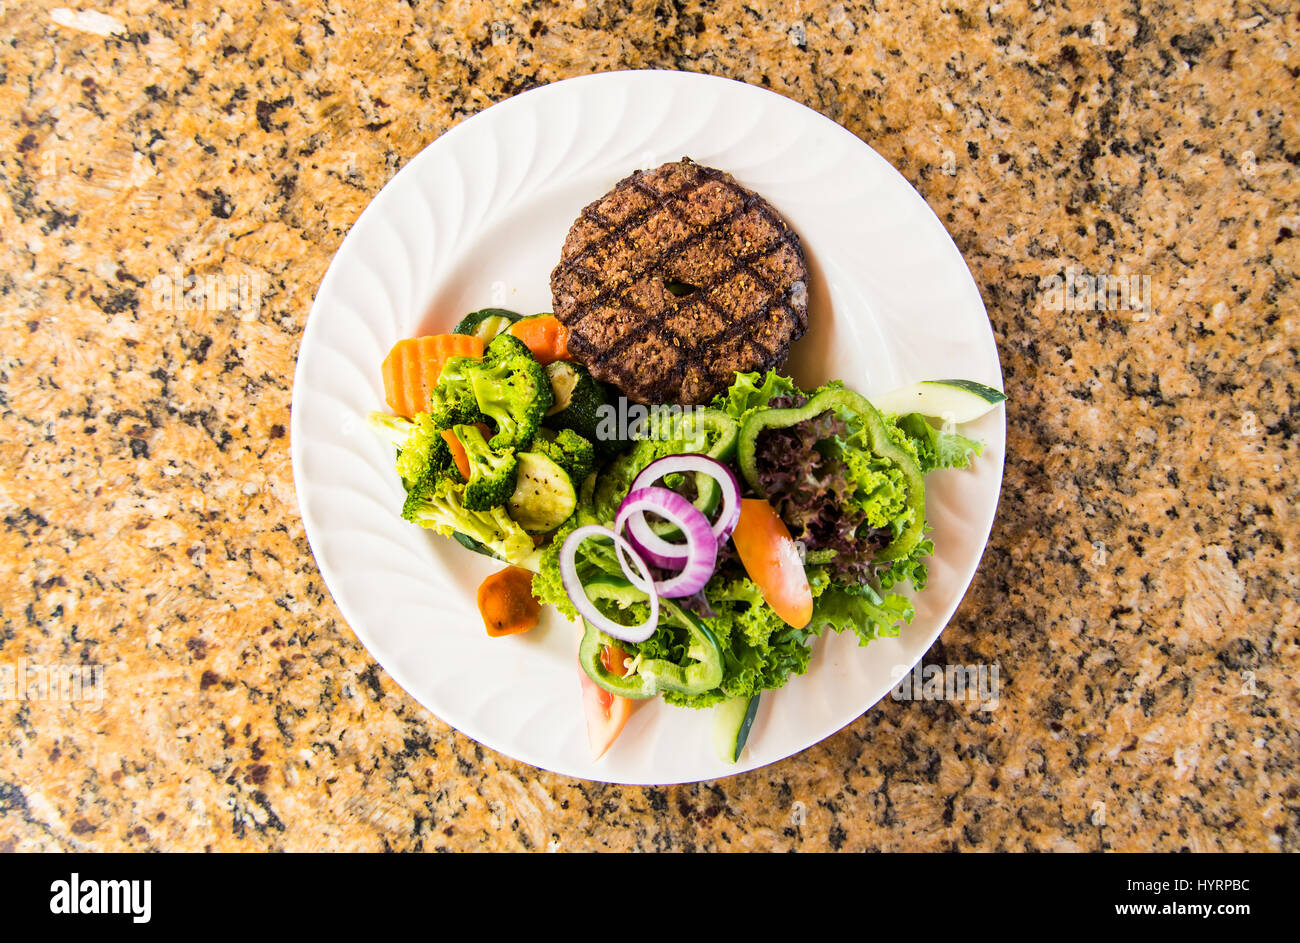 Meat Patty with salad and vegetables Stock Photo